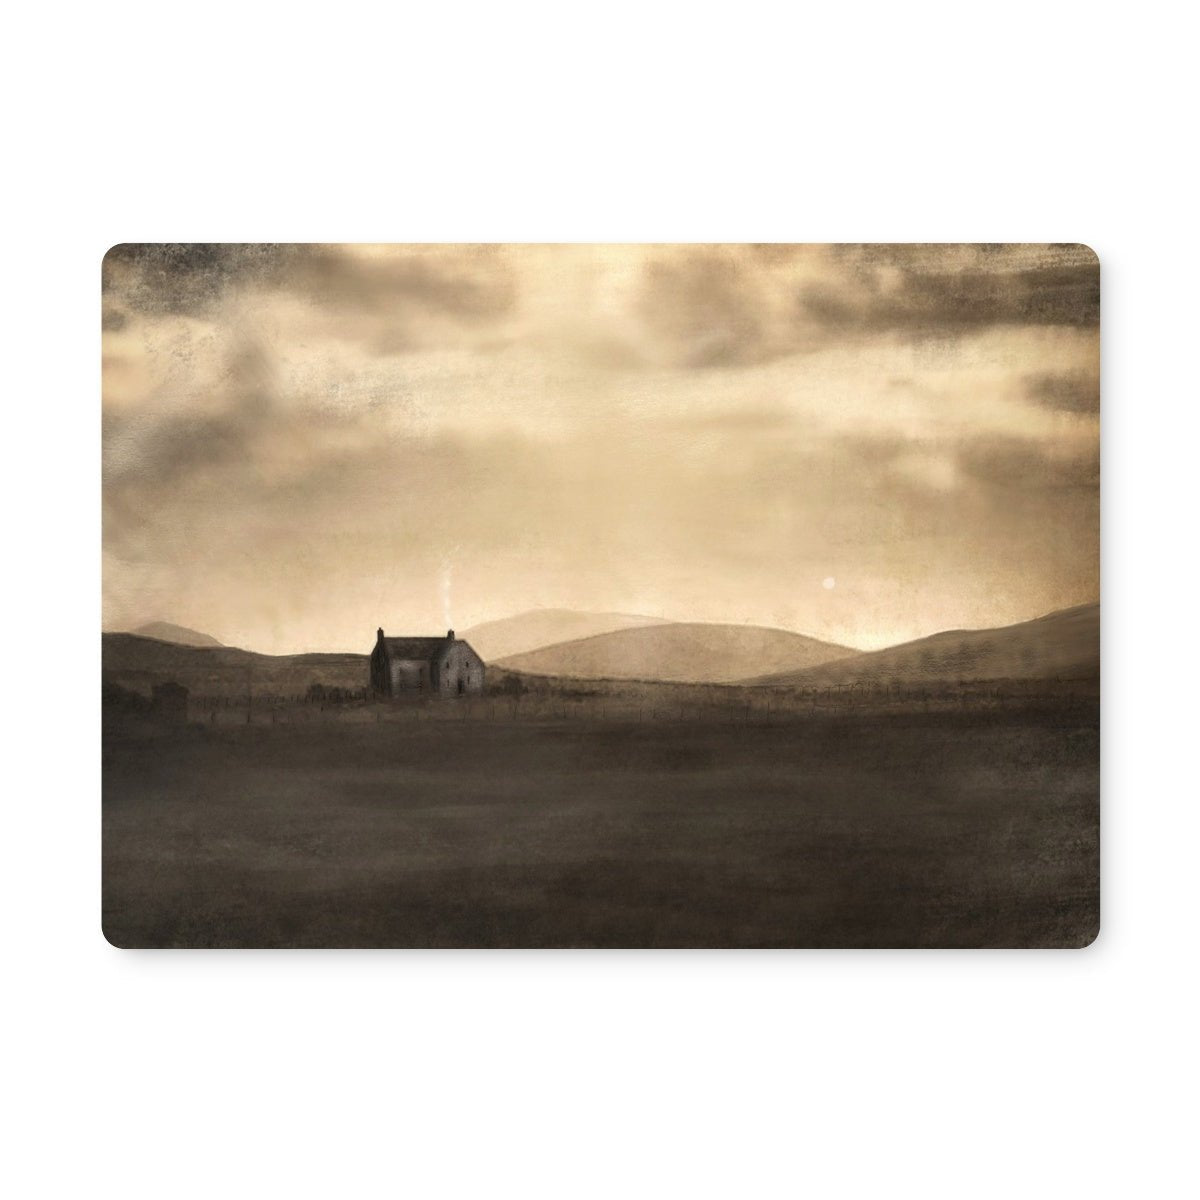 A Moonlit Croft Art Gifts Placemat-Placemats-Hebridean Islands Art Gallery-Single Placemat-Paintings, Prints, Homeware, Art Gifts From Scotland By Scottish Artist Kevin Hunter